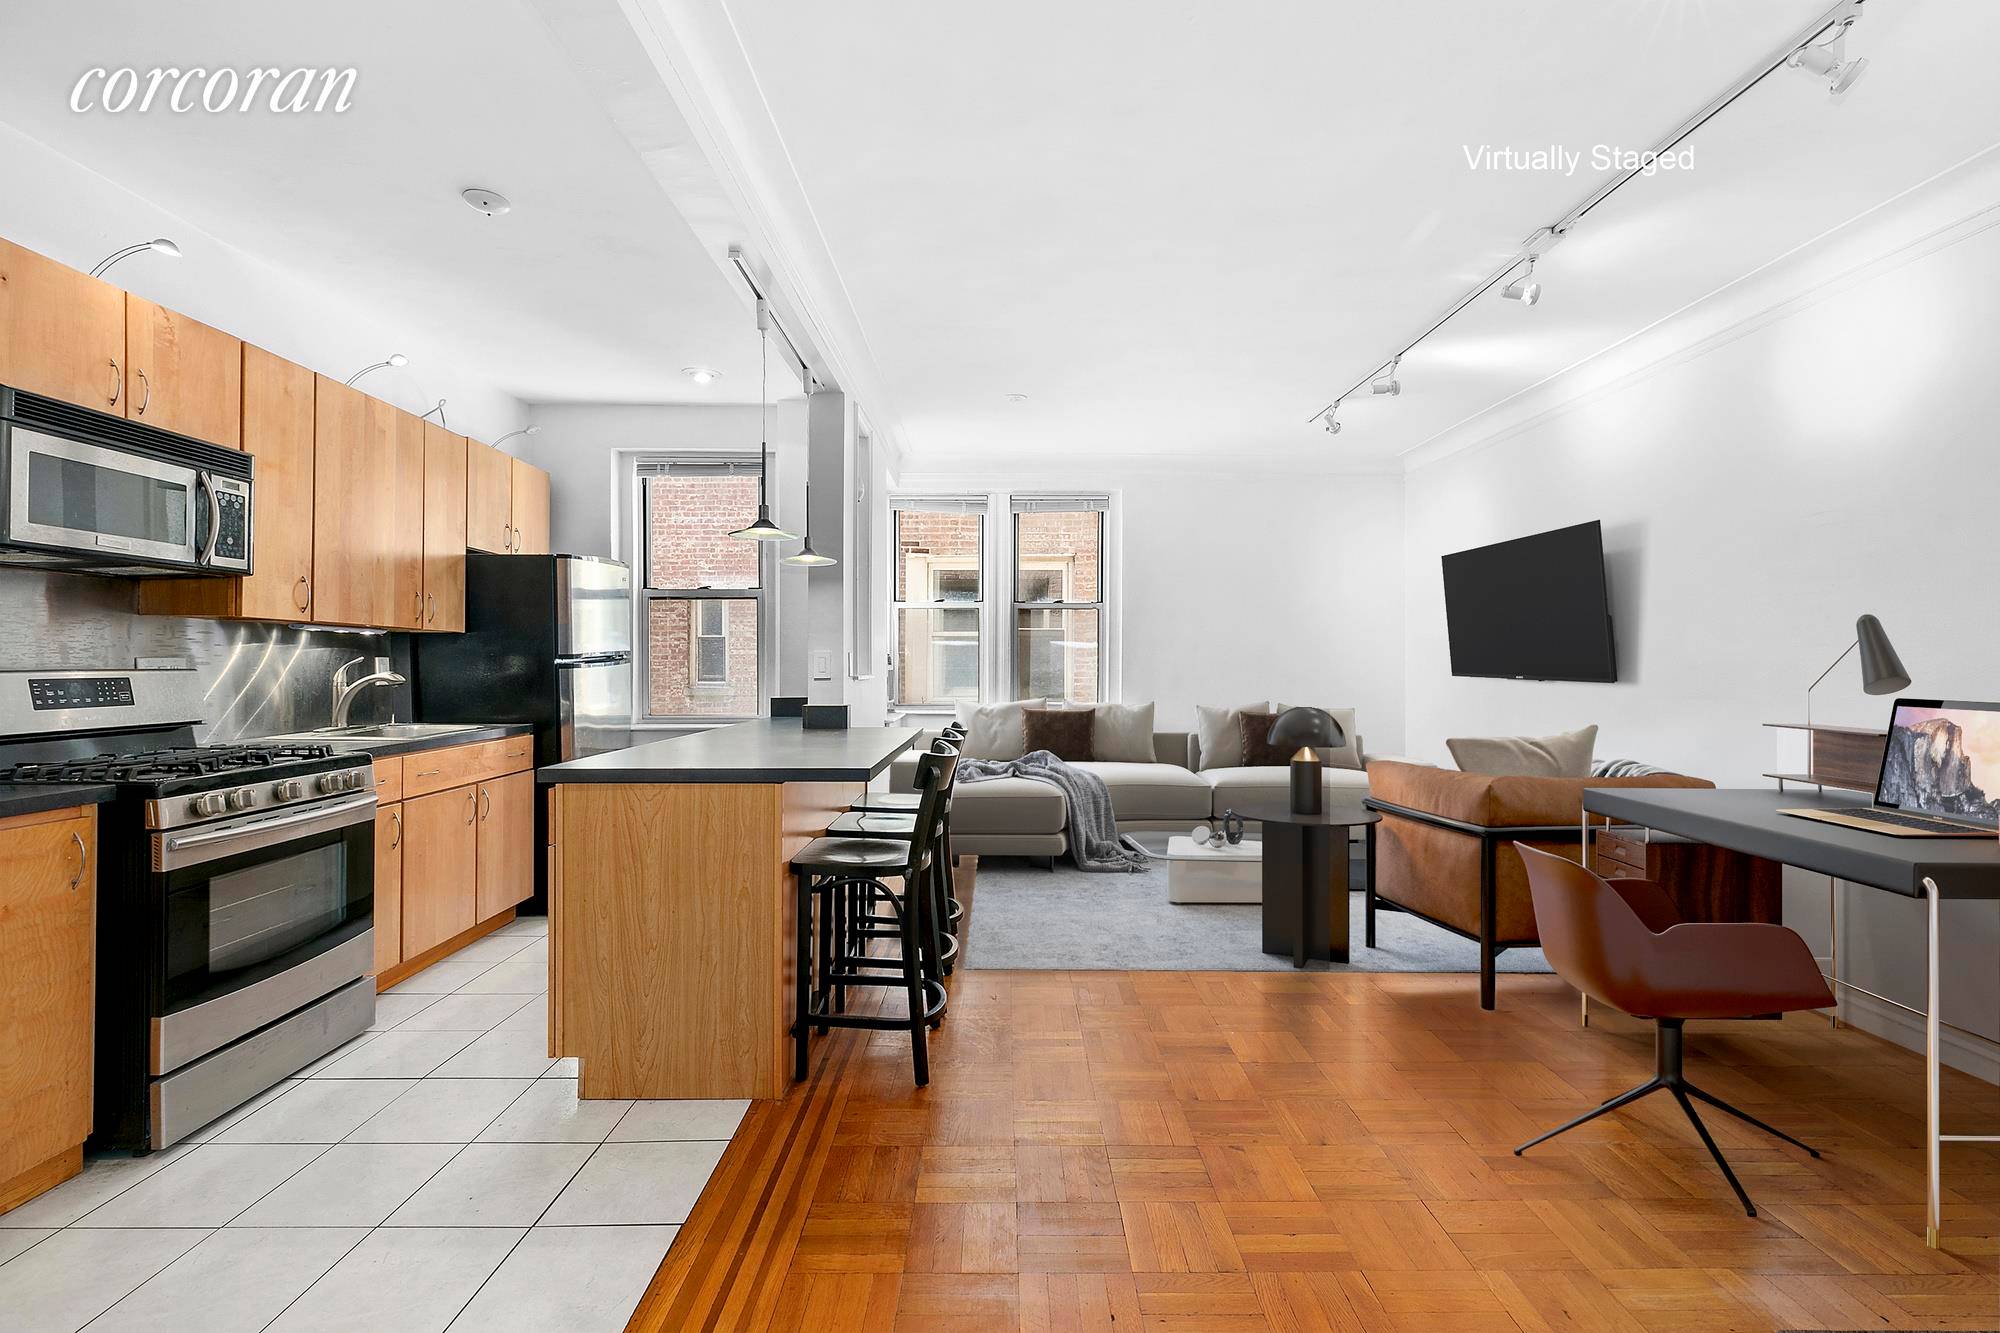 Investor friendly Pied a Terre allowed Gifting allowedWelcome to unit 4A, located at 41 35 45th Street, Sunnyside, NY.